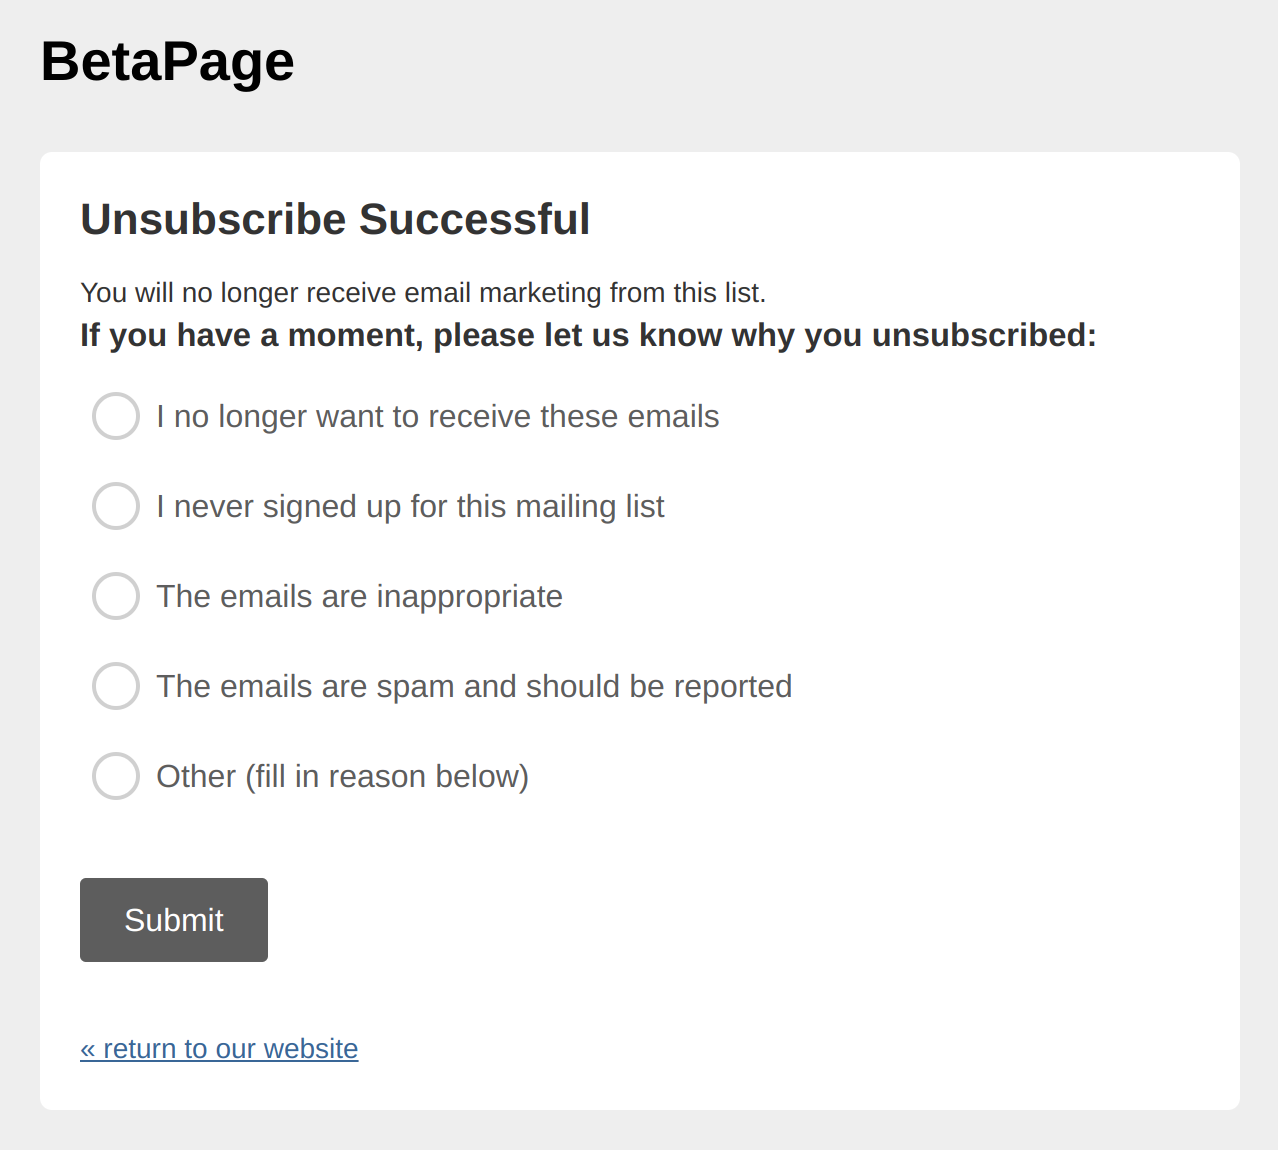 Example of a survey after an unsubscribe